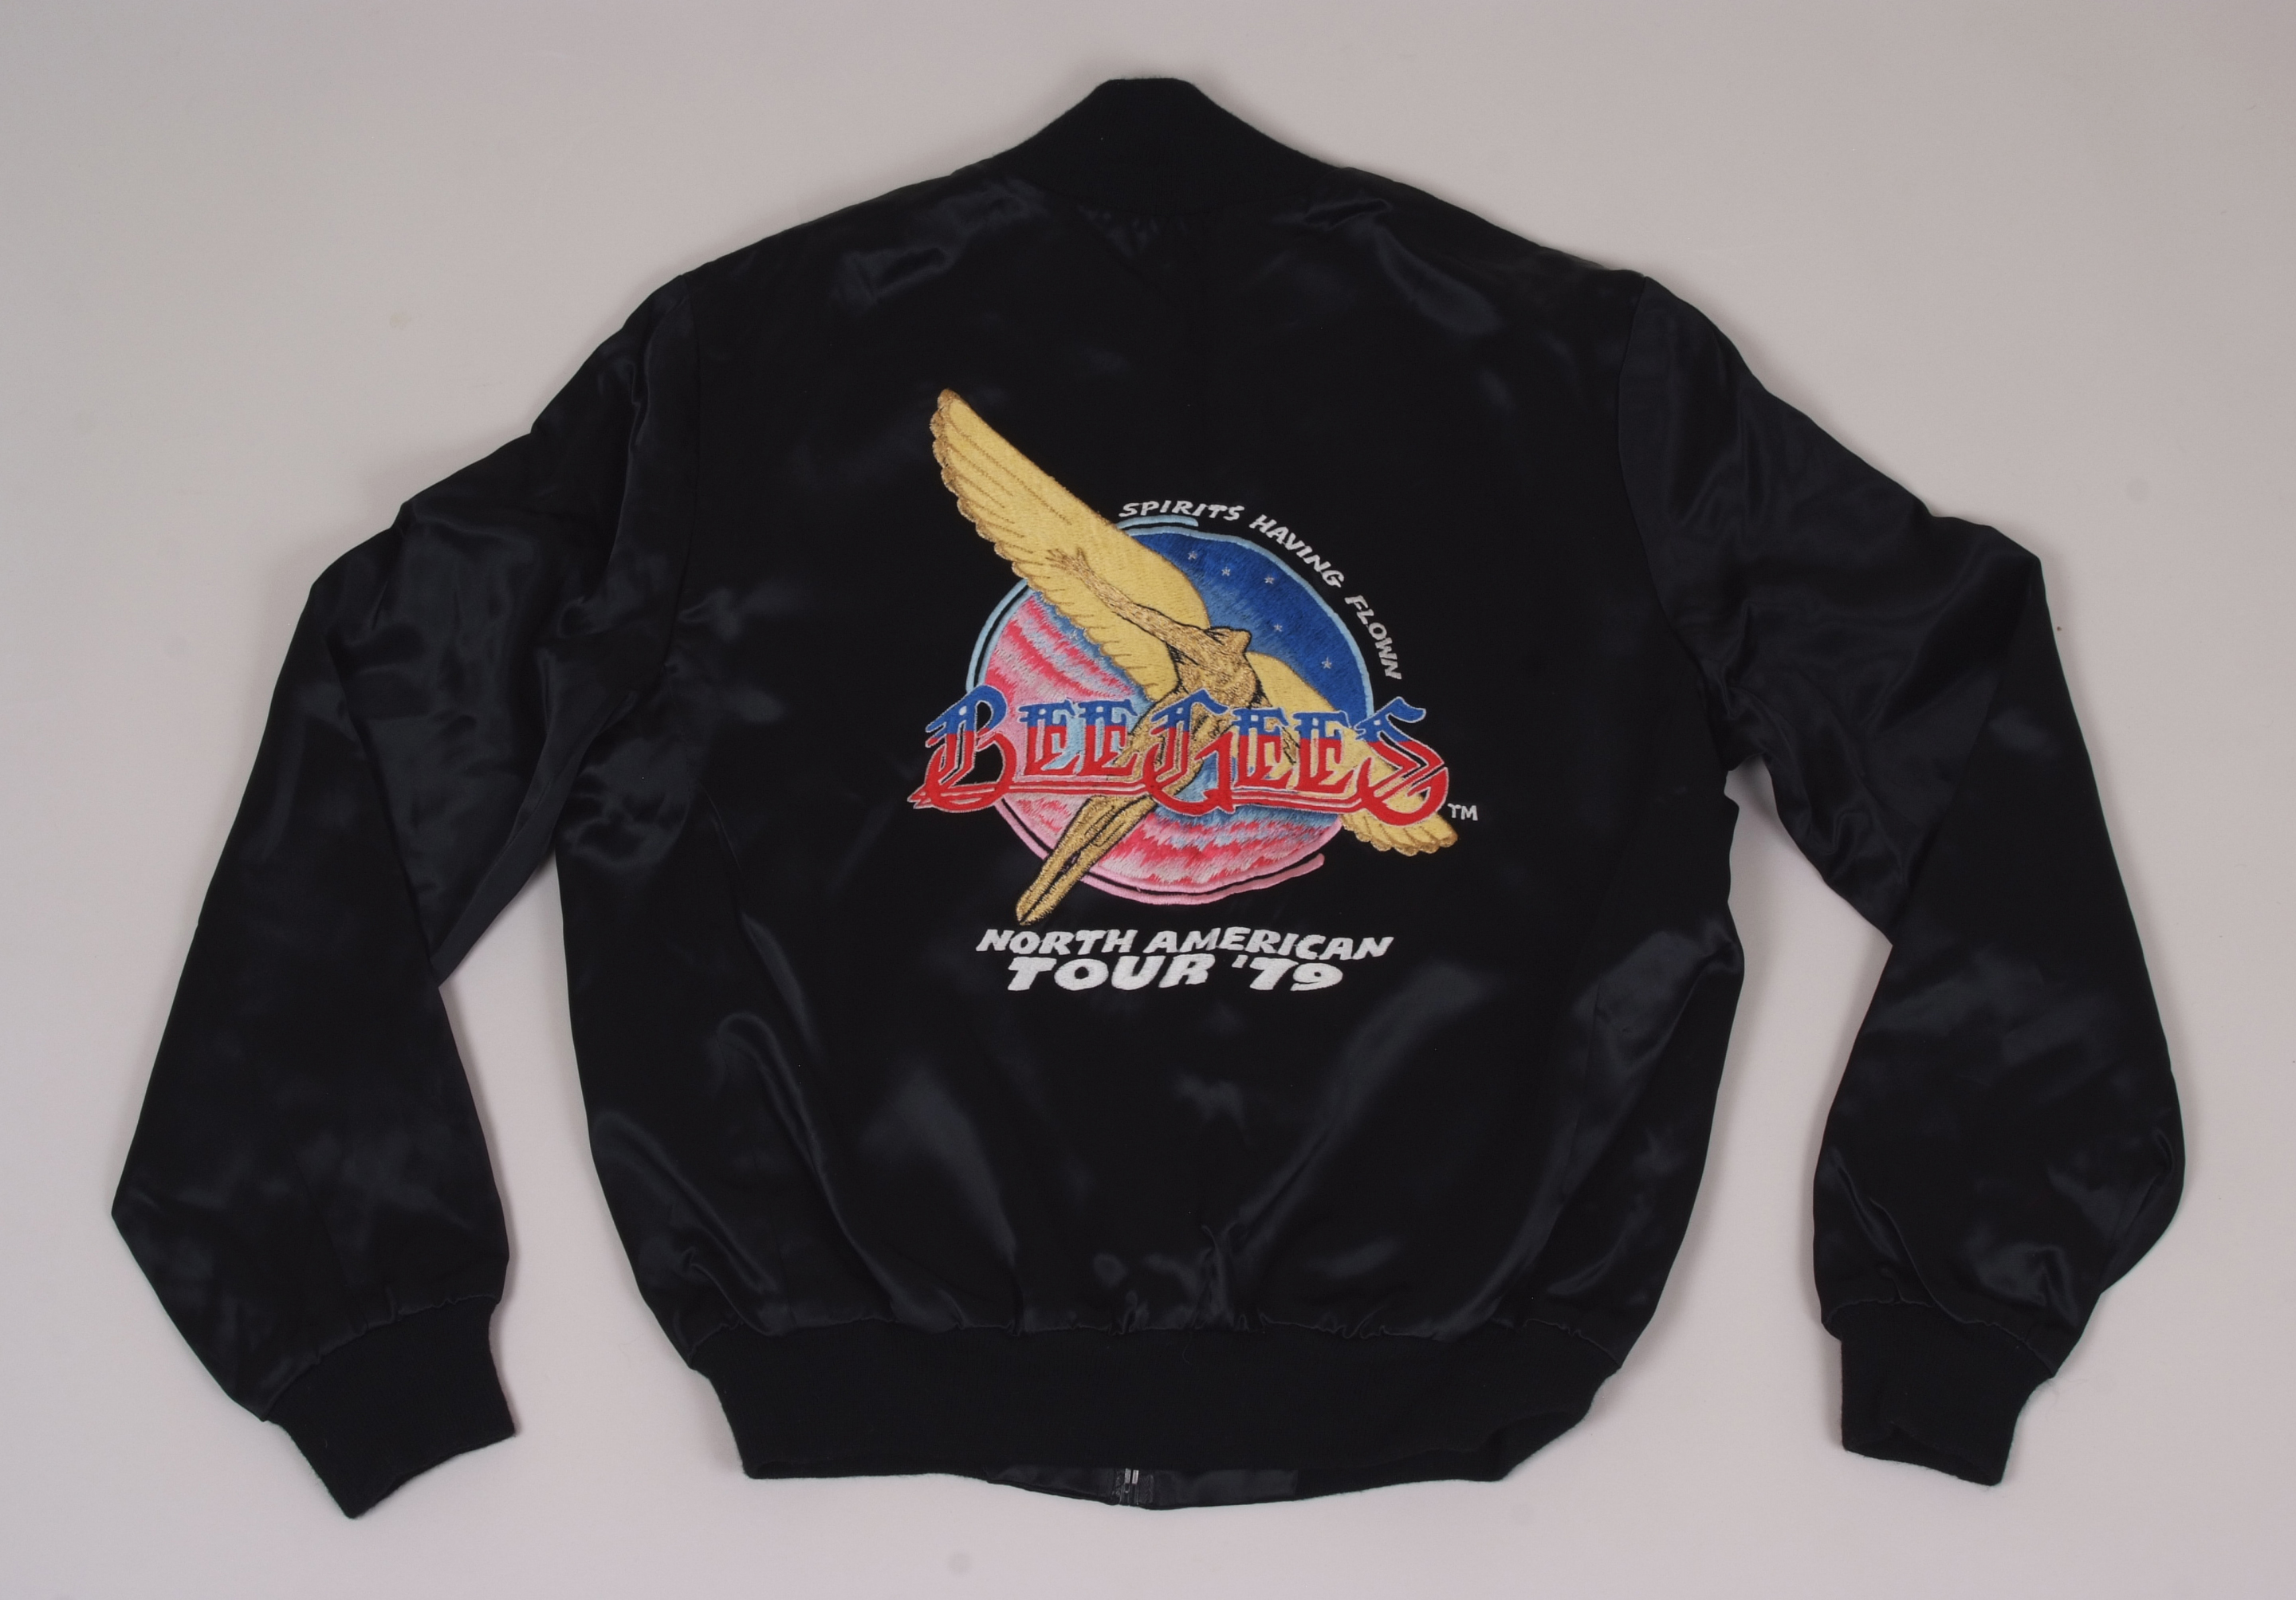 A RARE BEE GEE'S 1979 CONCERT TOUR JACKET. This black satin tour jacket was originally owned by